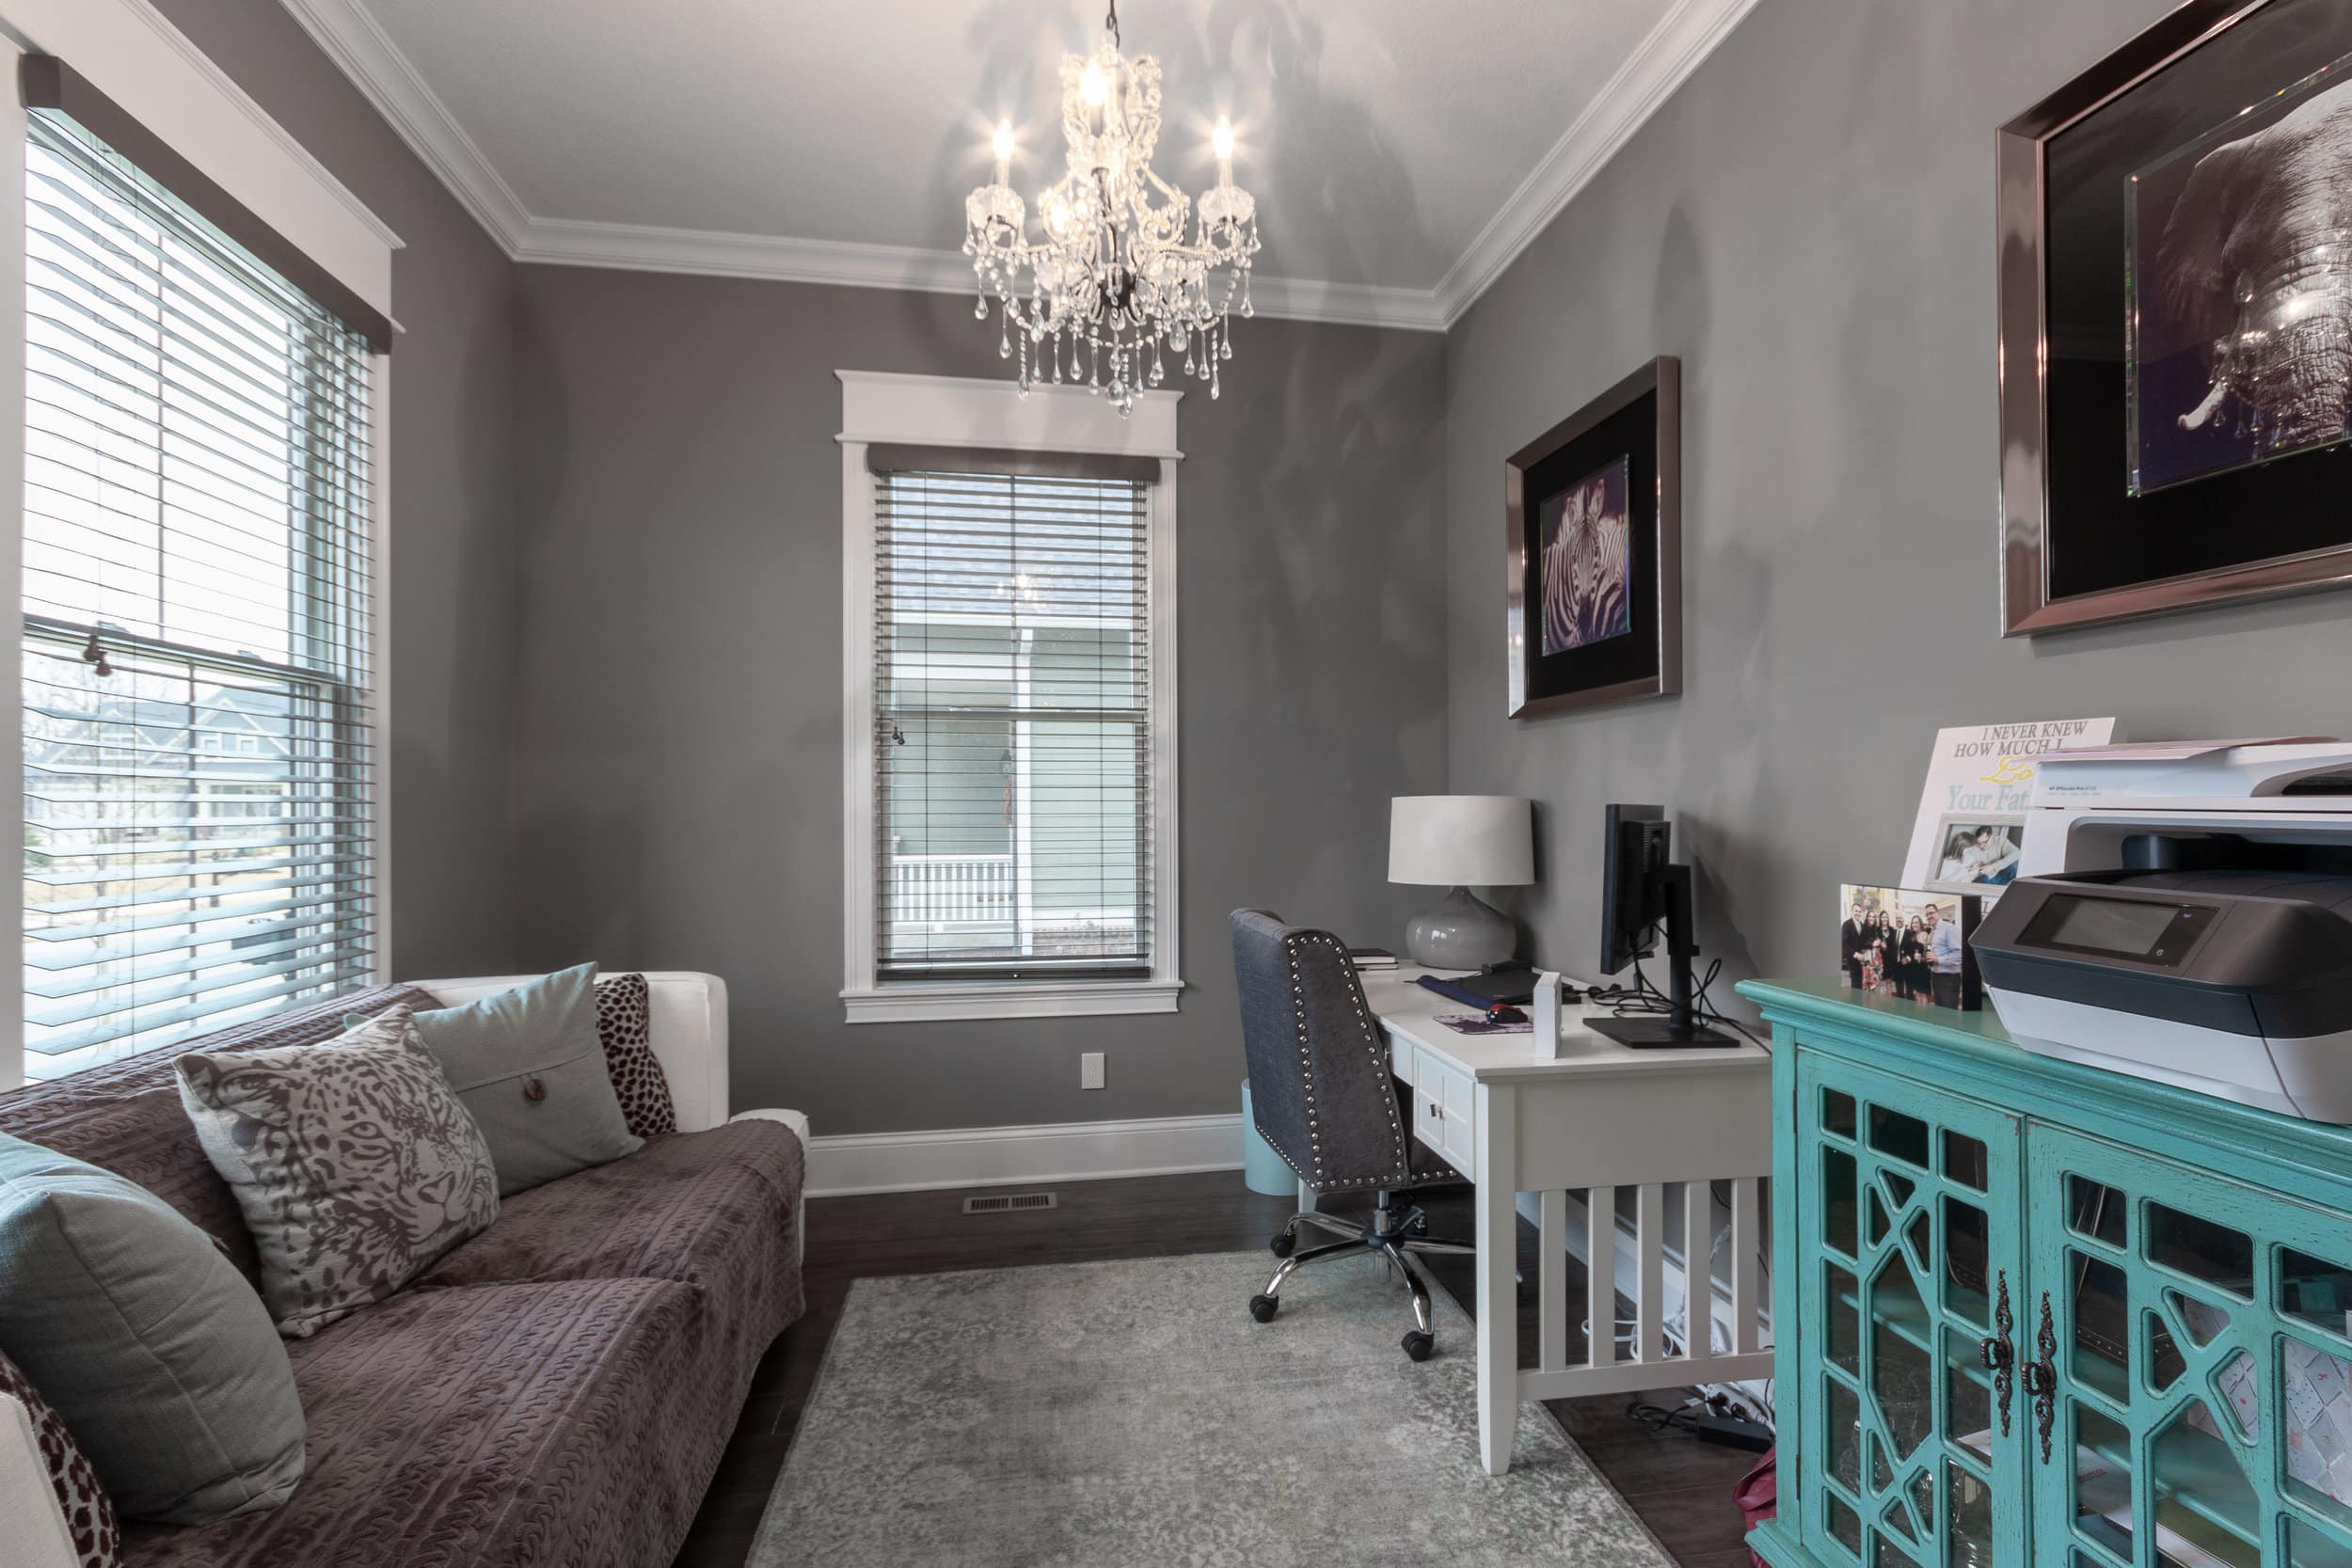 A home office with gray walls and a chandelier designed by a Custom Home Builder Fishers Indiana.